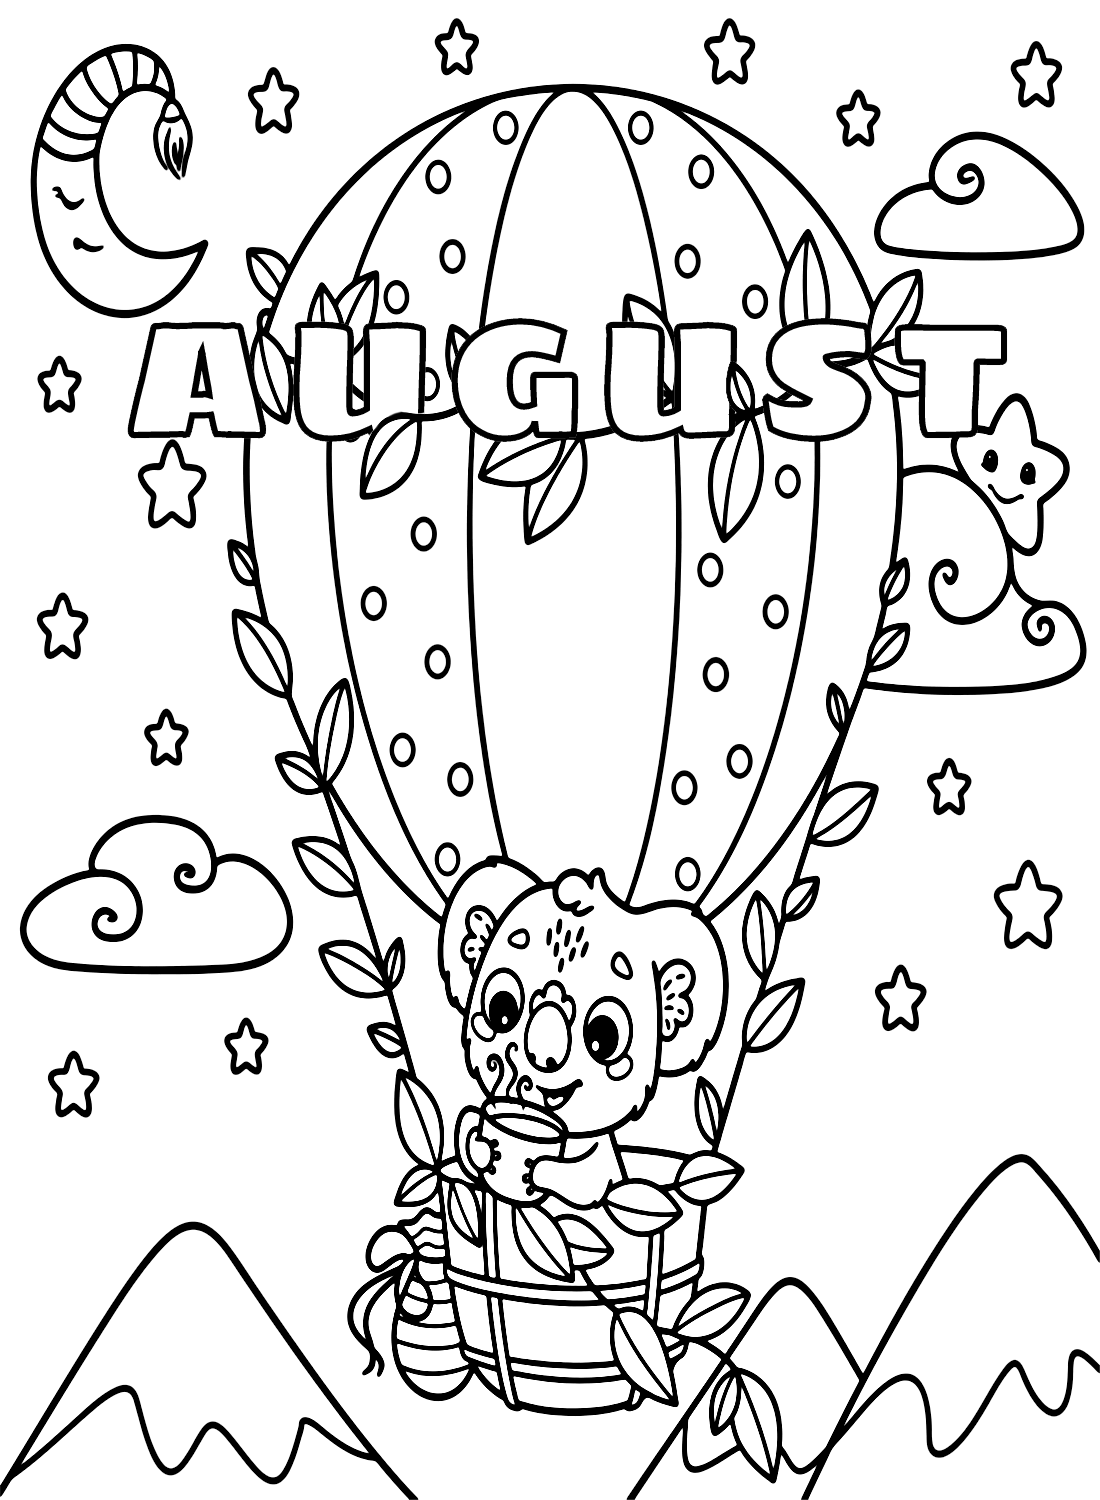 Sky Adventures with Koala in August Coloring Pages